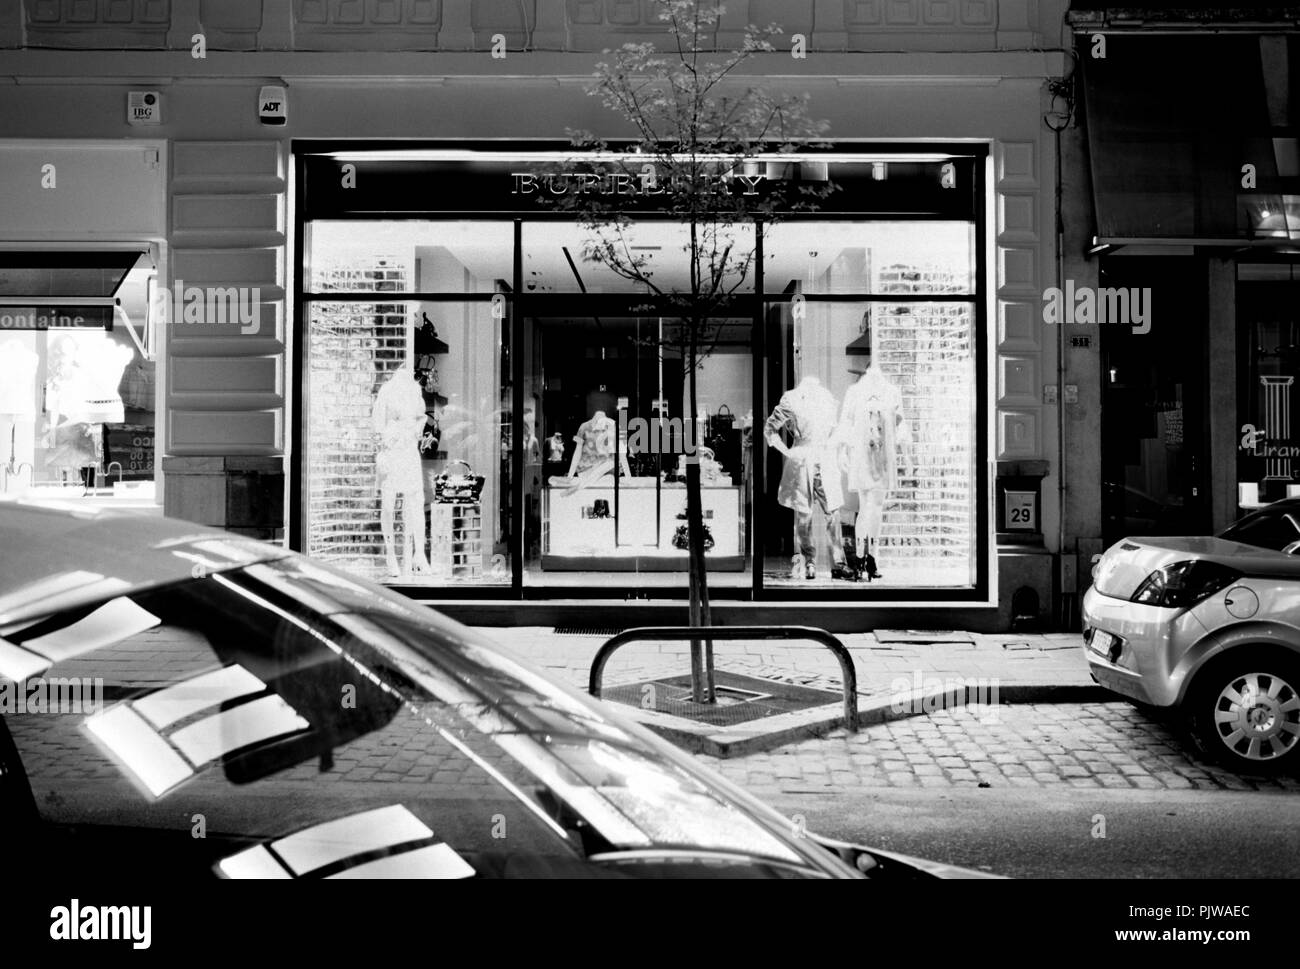 Burberry store Black and White Stock Photos & Images - Alamy